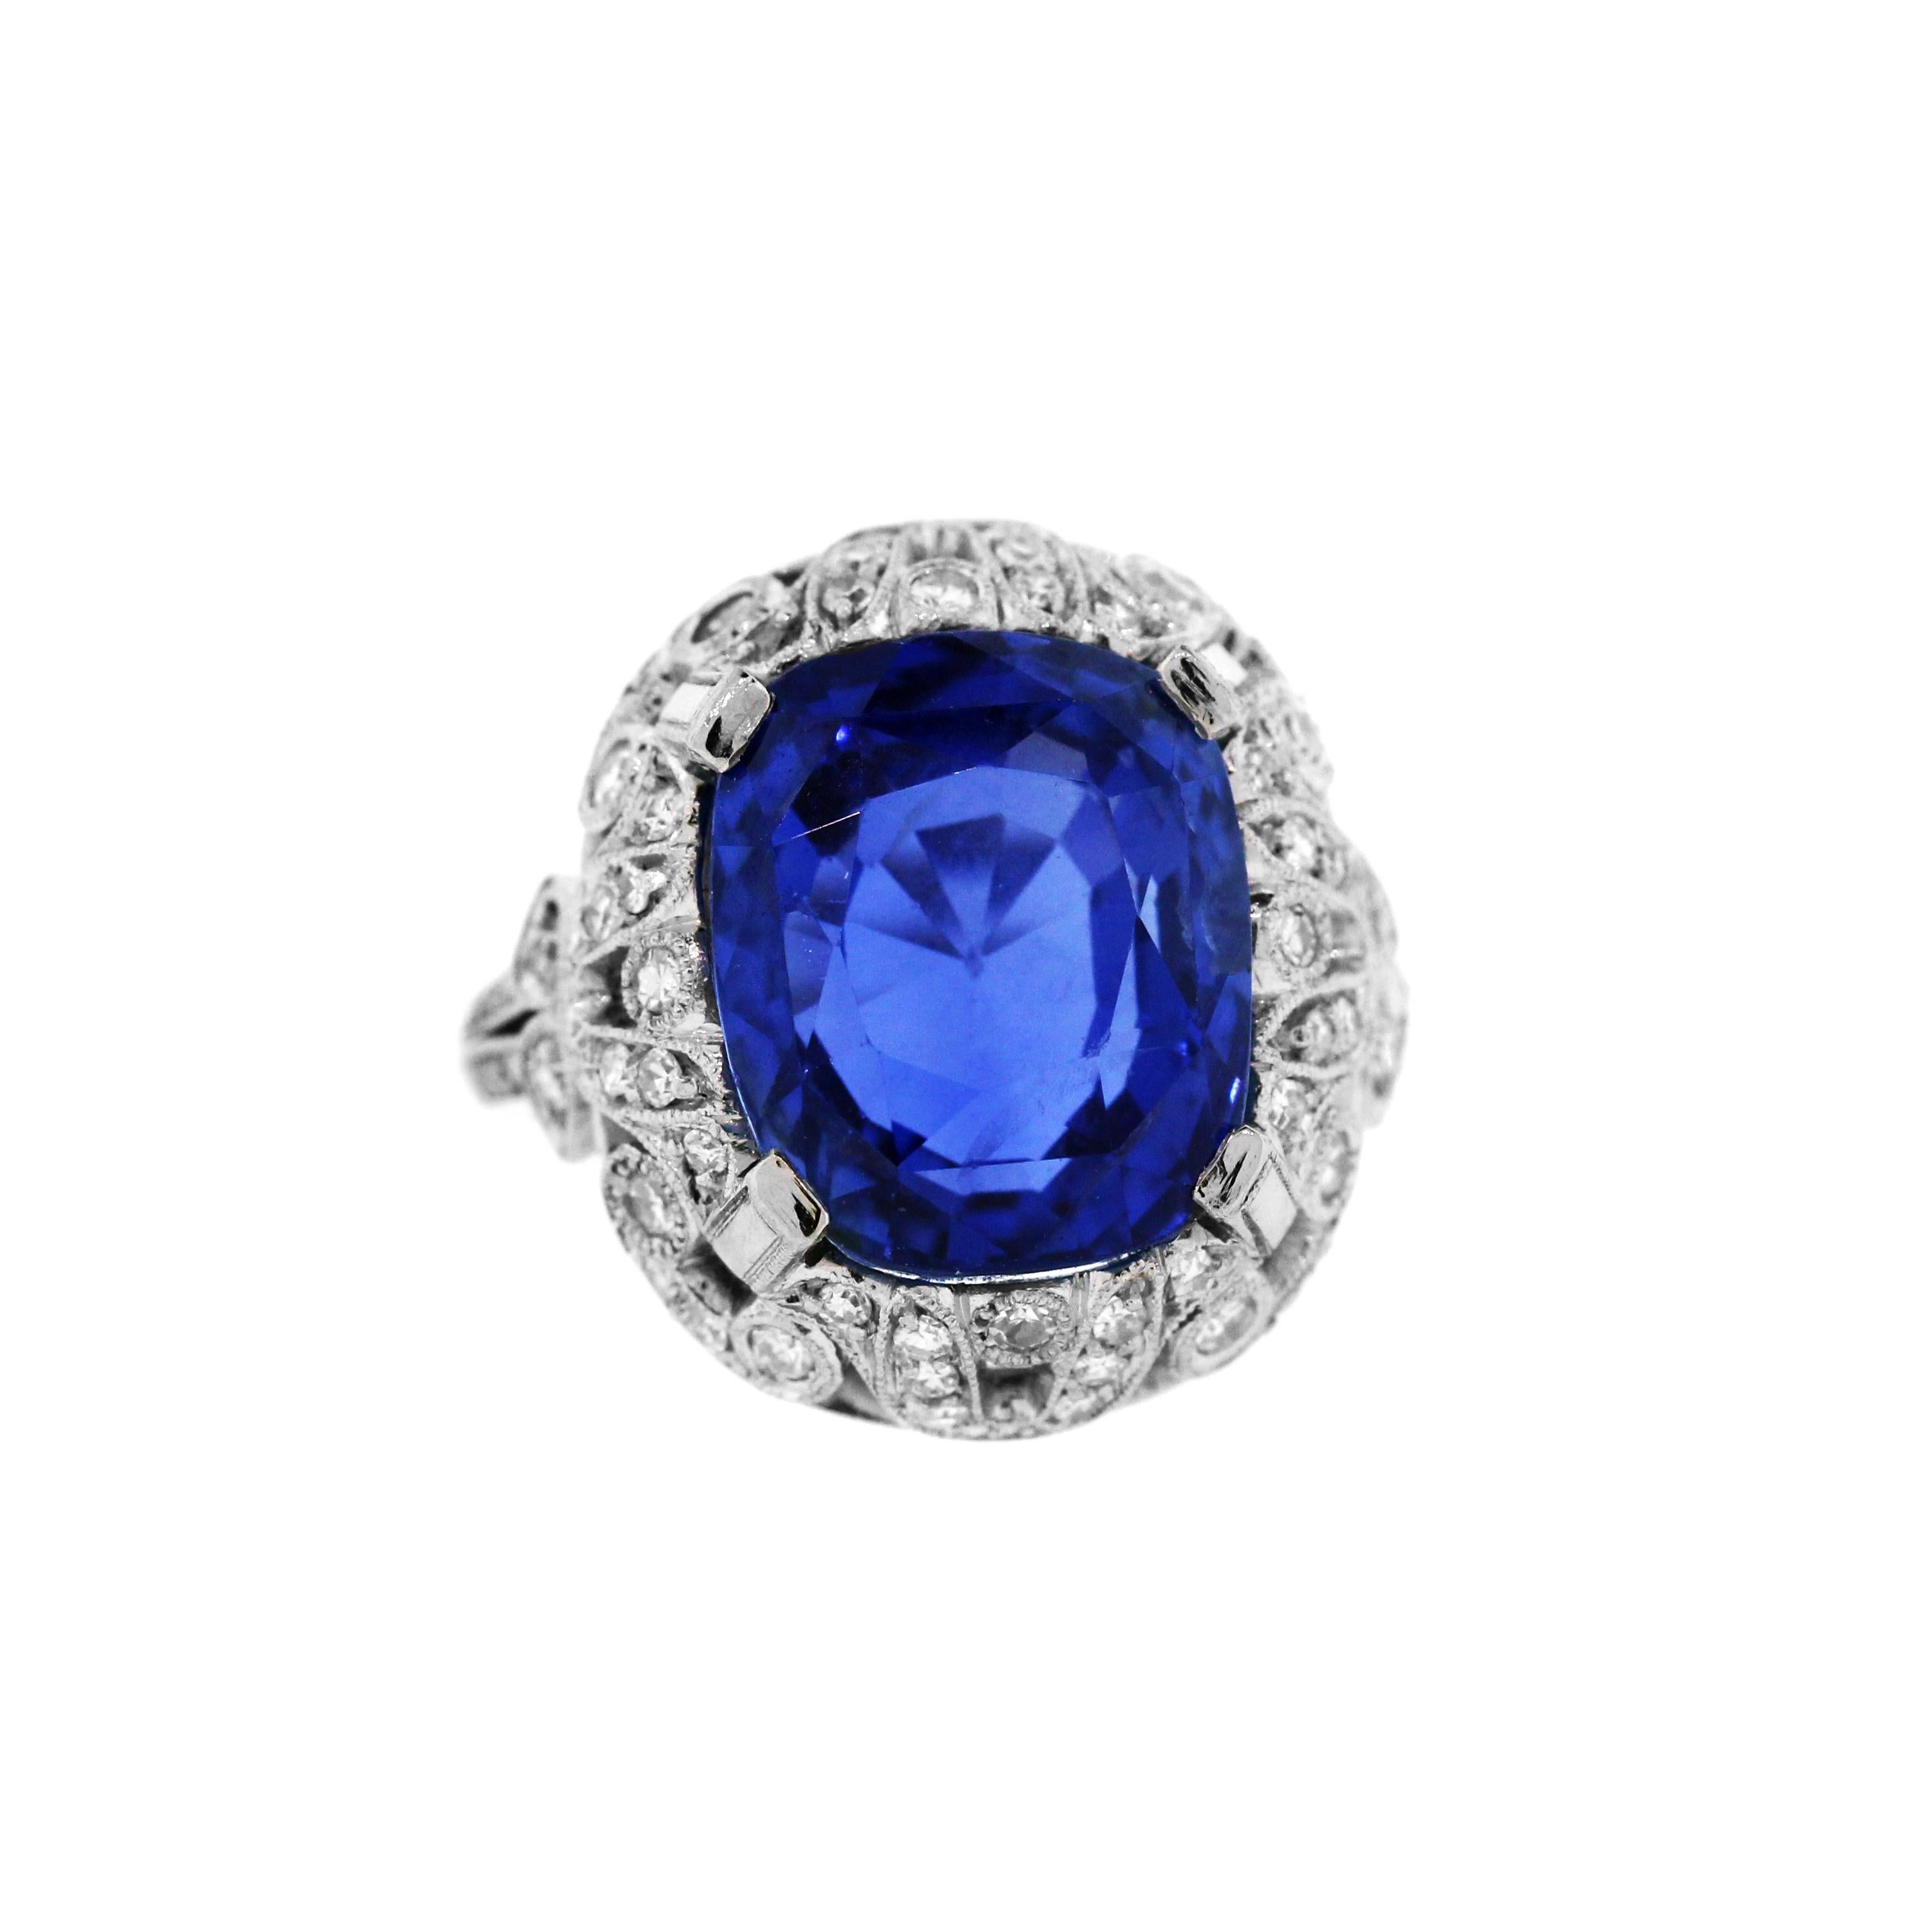 IF YOU ARE REALLY INTERESTED, CONTACT US WITH ANY REASONABLE OFFER. WE WILL TRY OUR BEST TO MAKE YOU HAPPY!

Platinum Ring with No Heat Burma Sapphire Center with Diamonds

11.78 carat Burma, No Heat, Natural Blue Sapphire. Cushion-cut. Truly